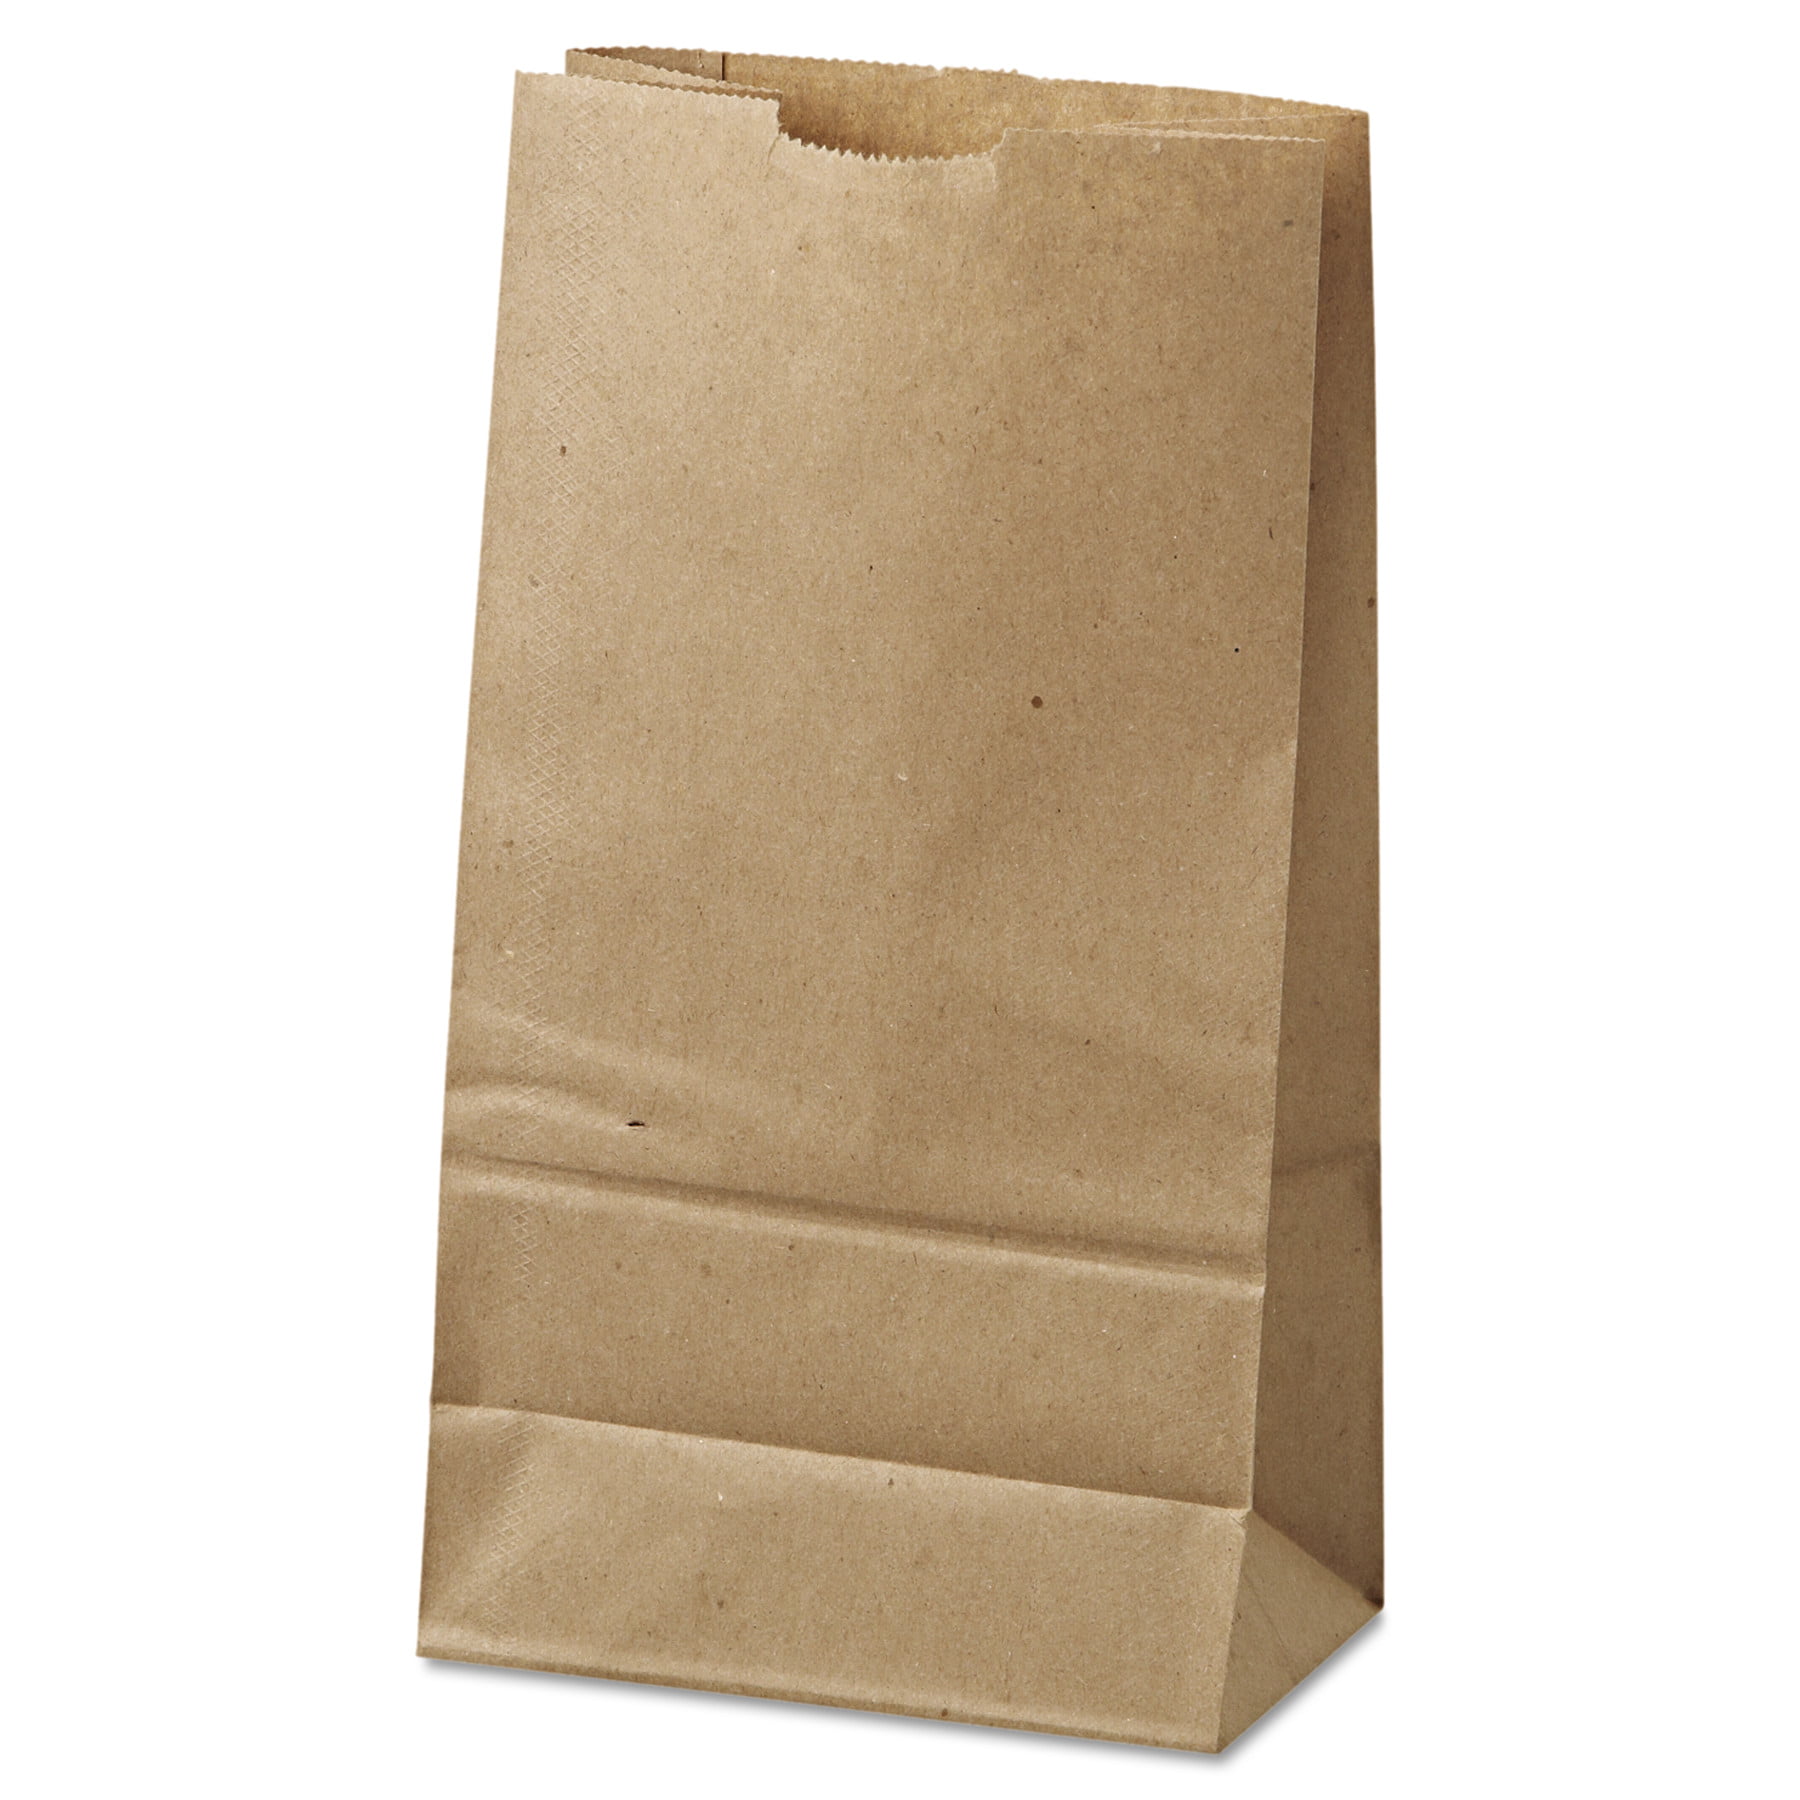 2000 x High Quality  7" x 7" Brown Kraft Paper Bags Fruits Sweets Packing Gifts